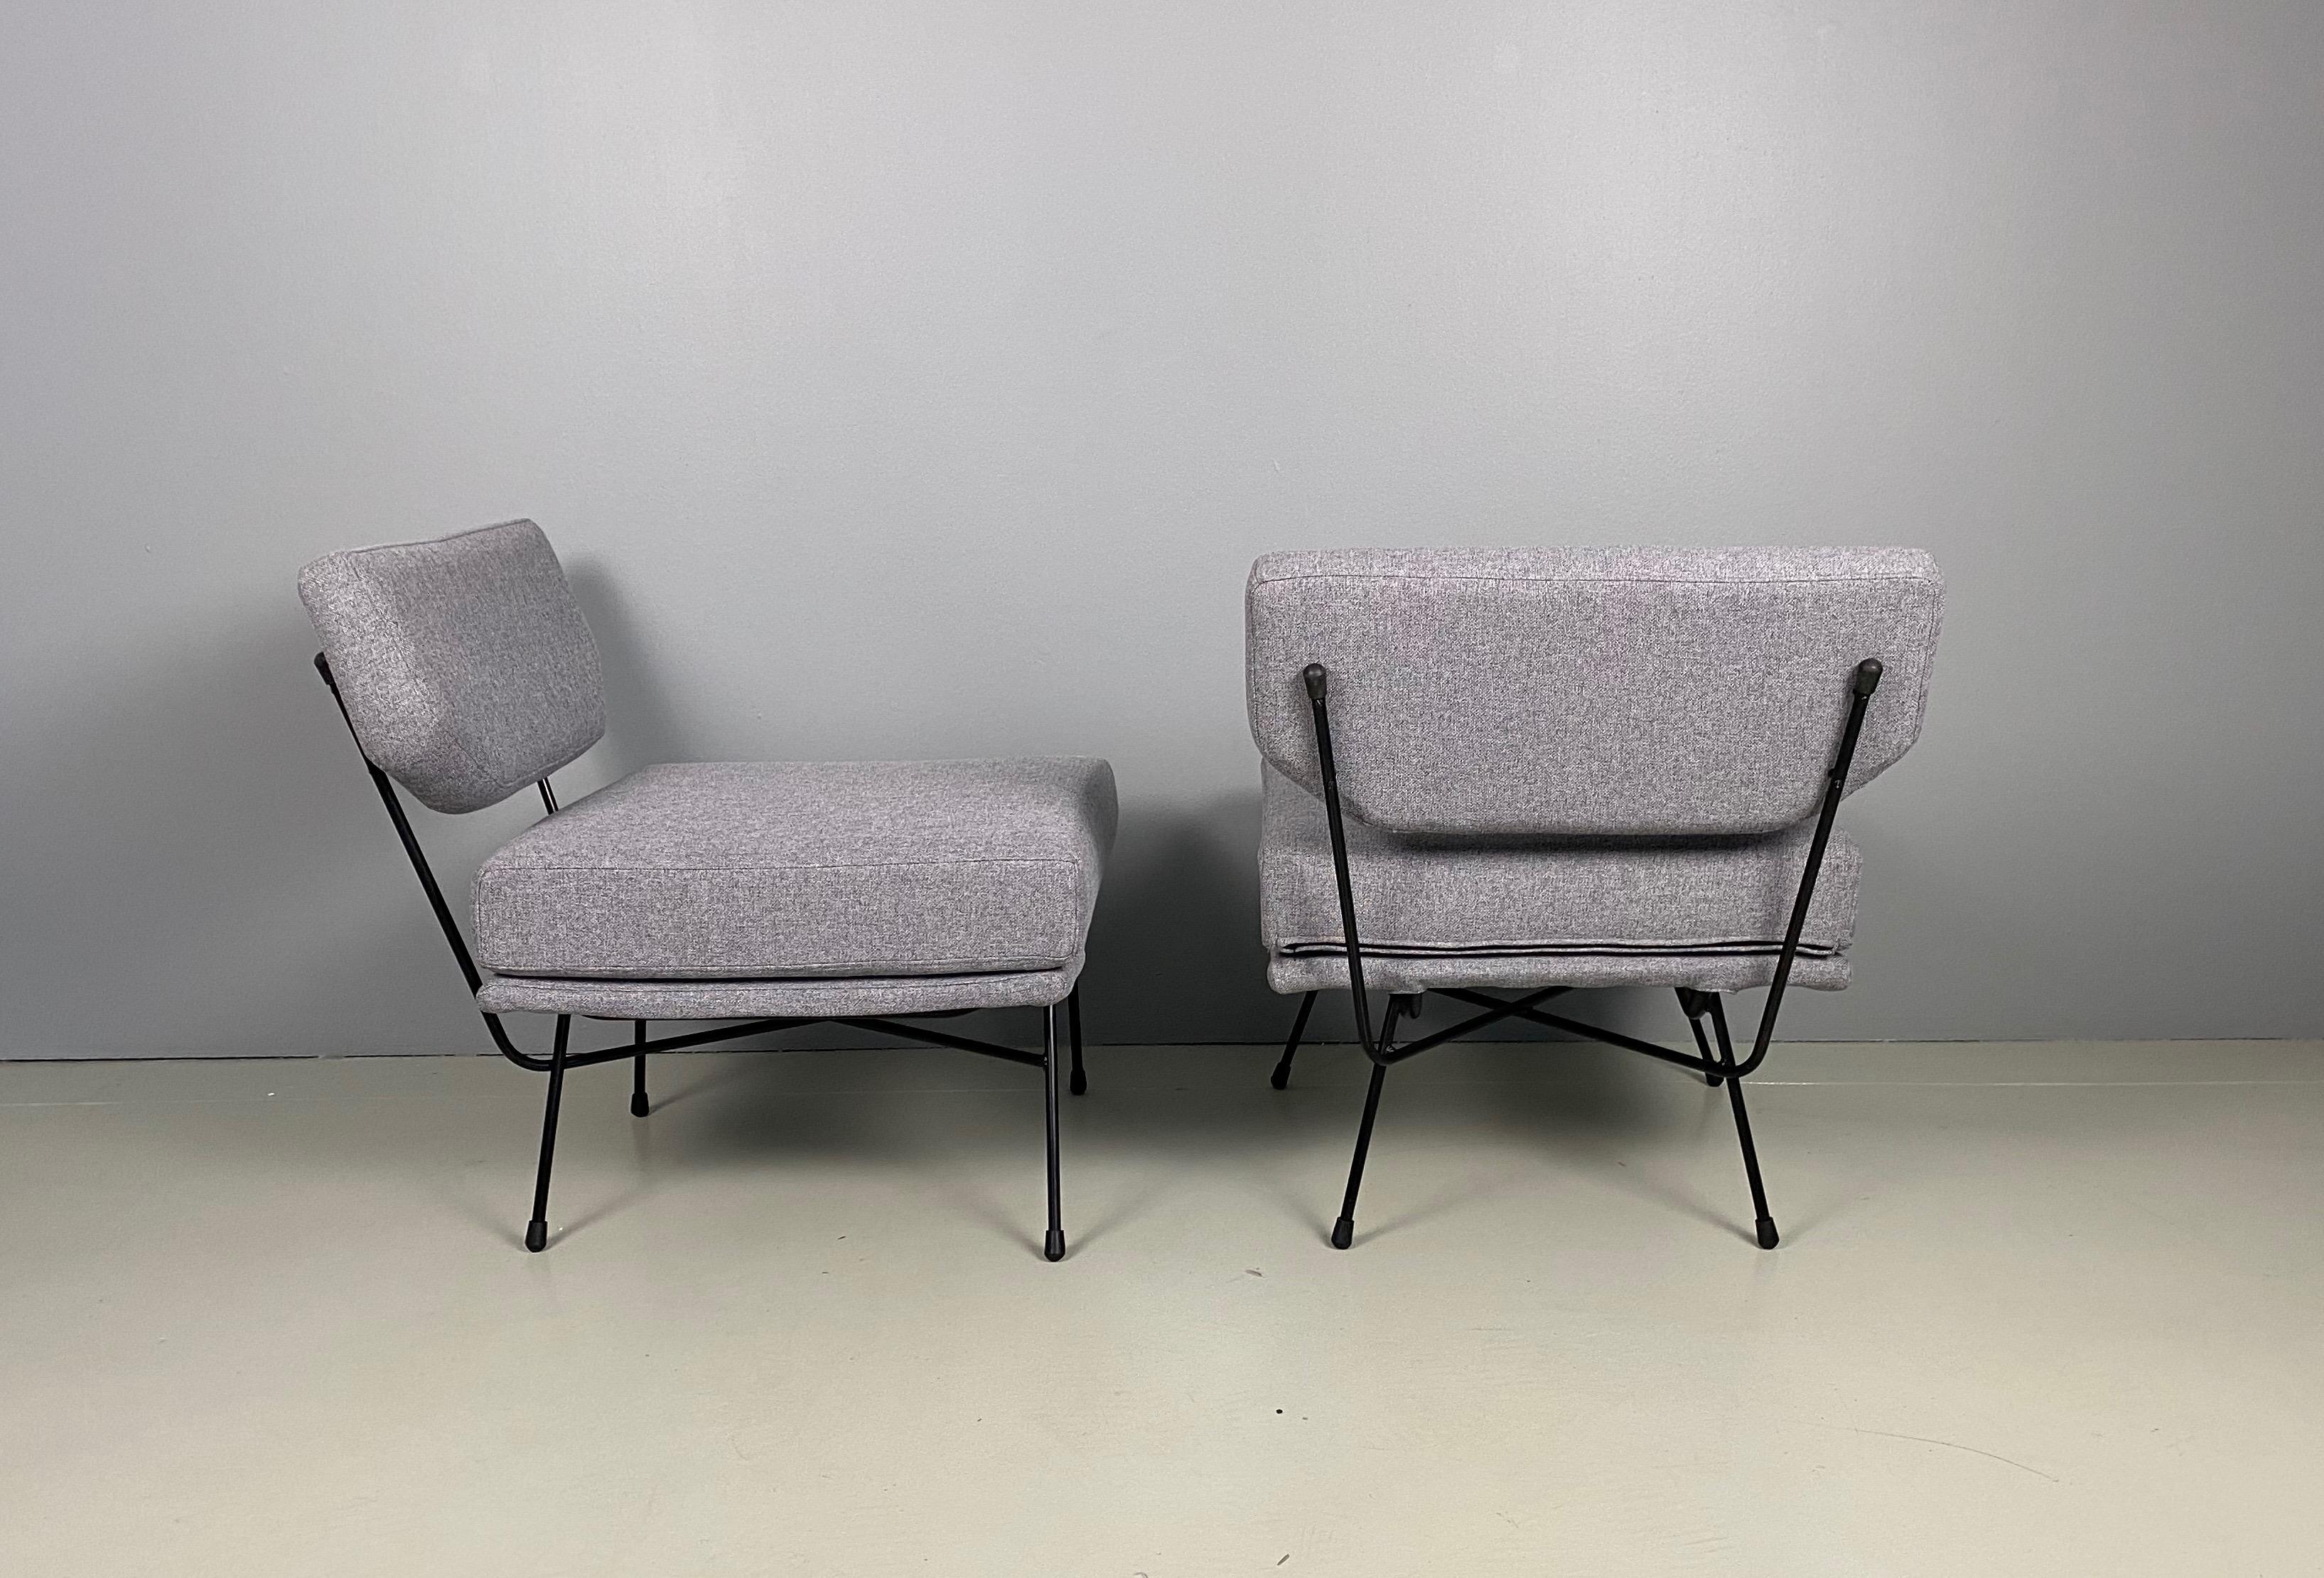 Italian Pair of 'Elettra' Lounge Chairs by BBPR, Arflex, Italy 1953, Compasso D'Oro 1954